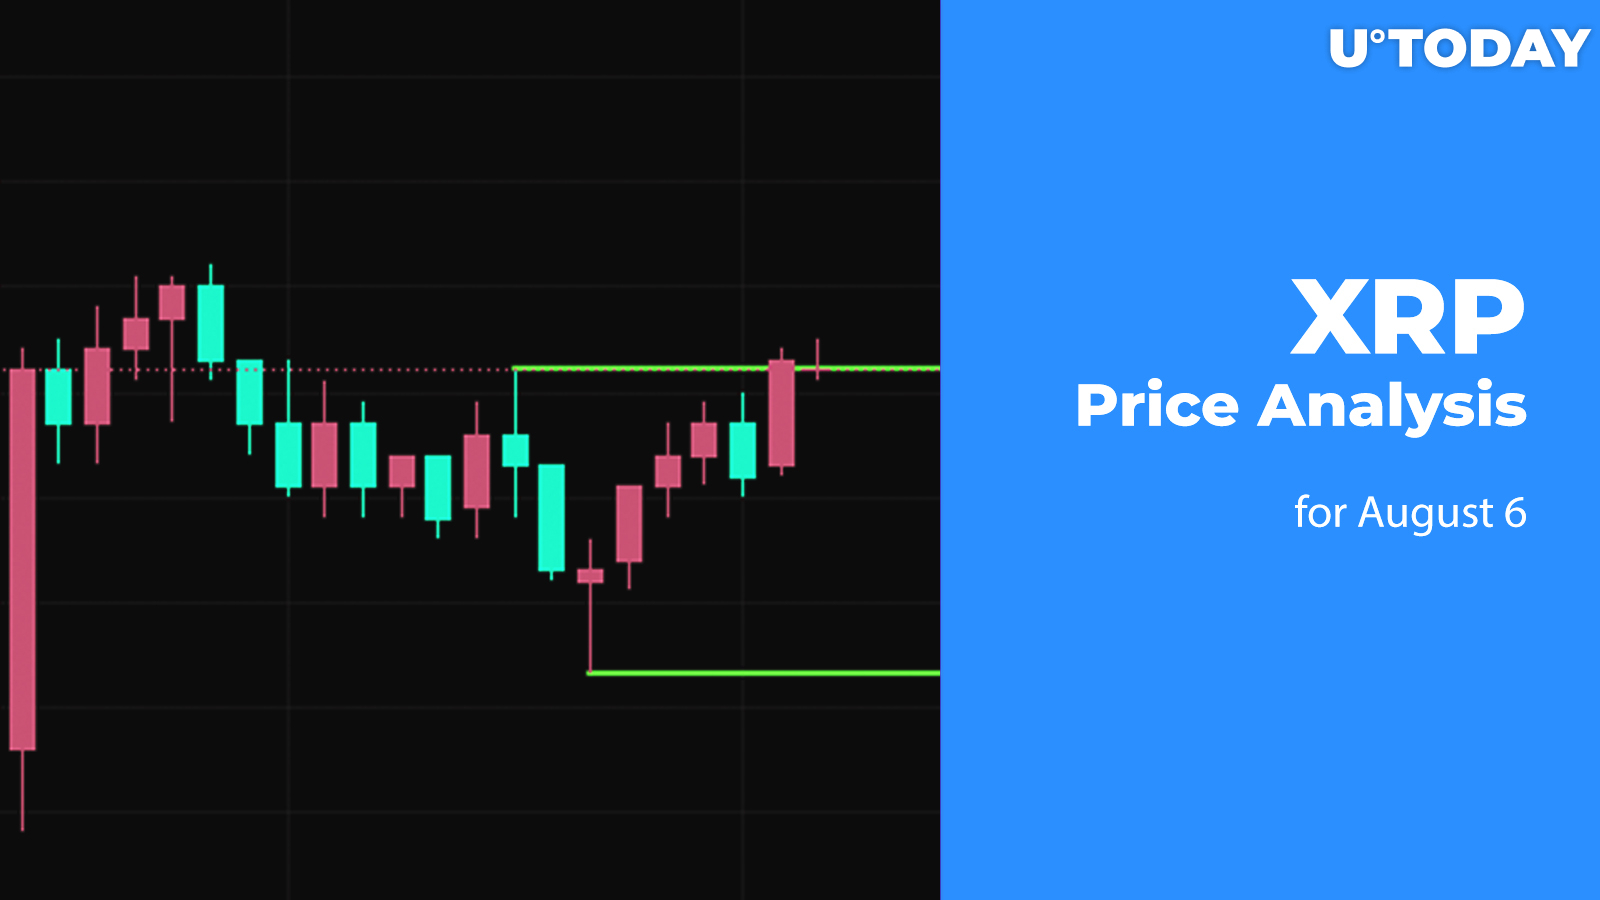 XRP Price Analysis for August 6